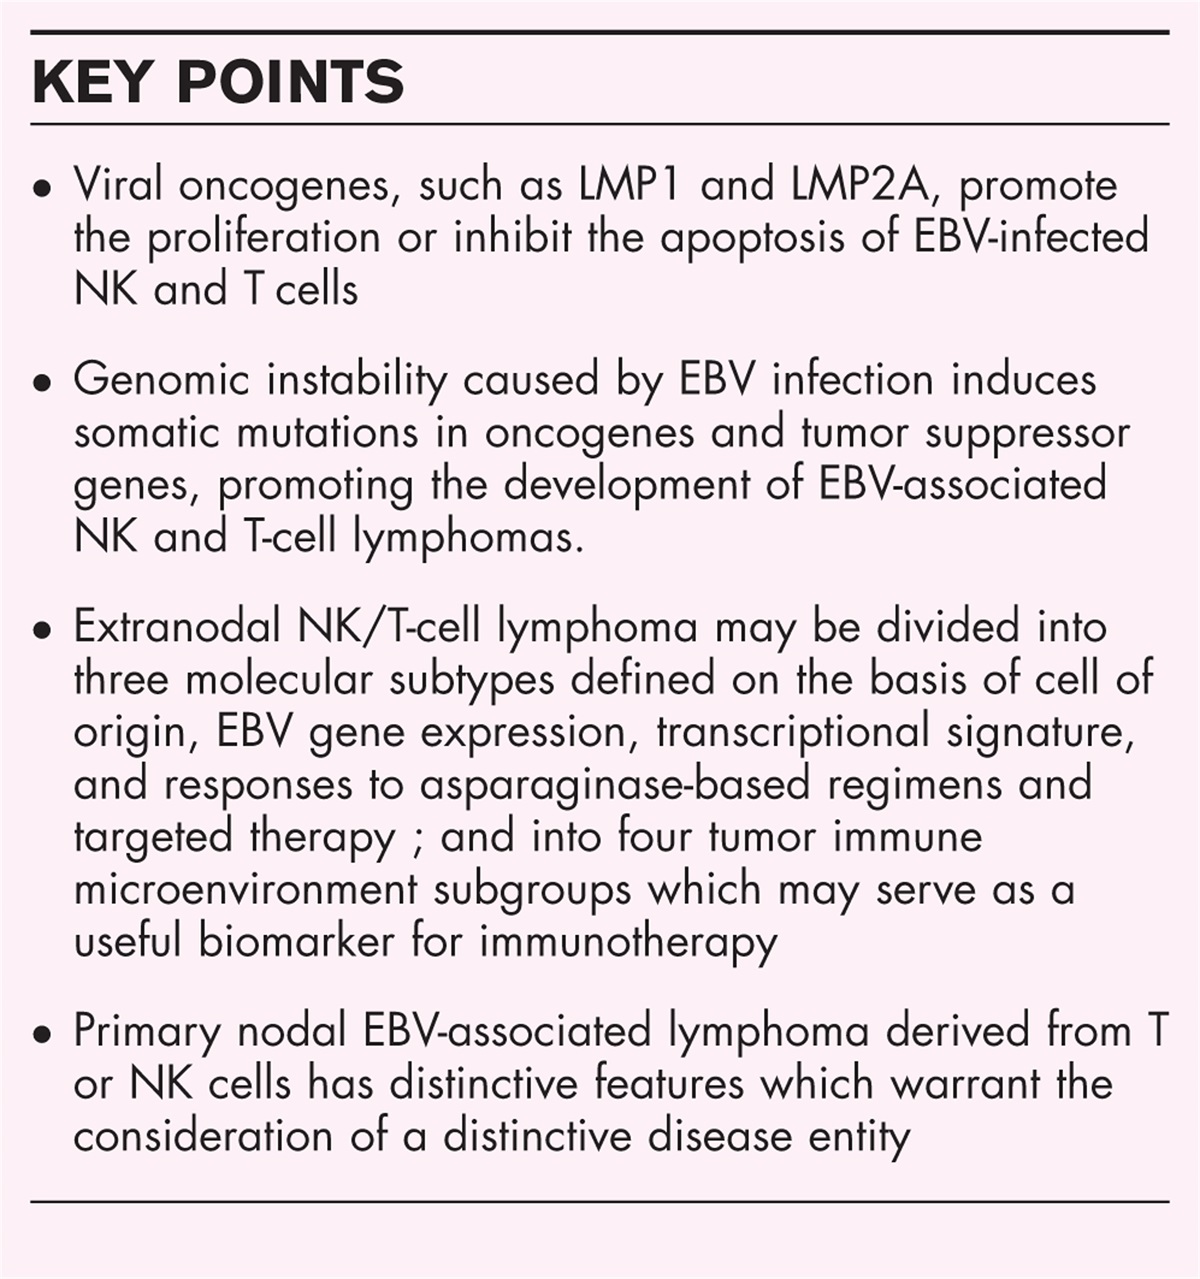 EBV-associated NK and T-cell lymphoid neoplasms